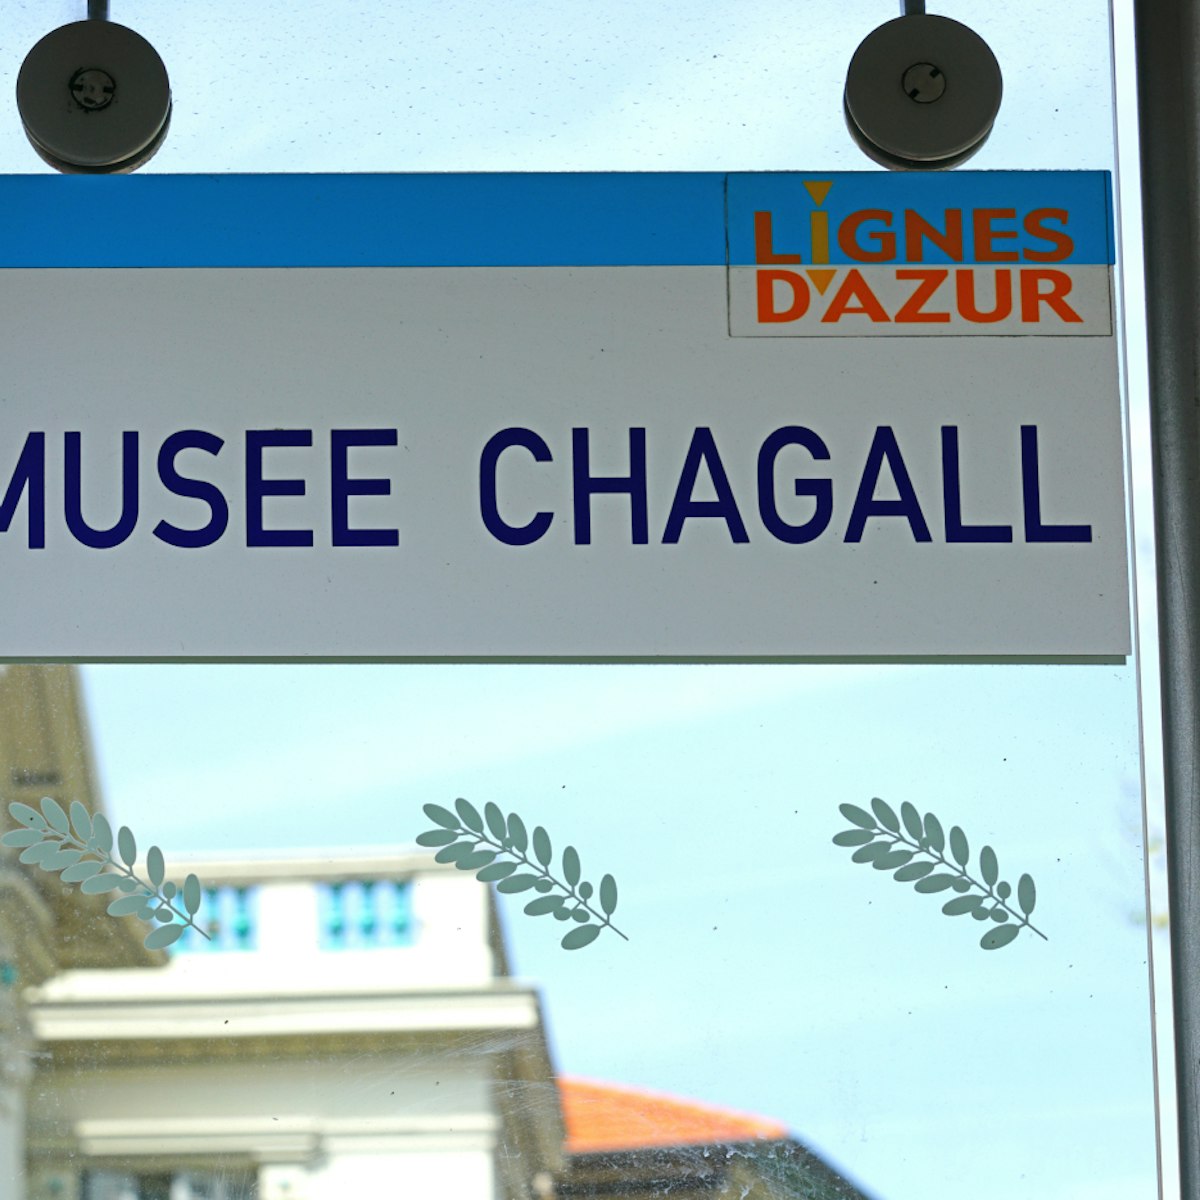 NICE, FRANCE -21 APR 2018- View of the Musee Marc Chagall (National Museum or Chagall Biblical Message) in Nice, France.; Shutterstock ID 1103872247; Your name (First / Last): -; GL account no.: -; Netsuite department name: -; Full Product or Project name including edition: -